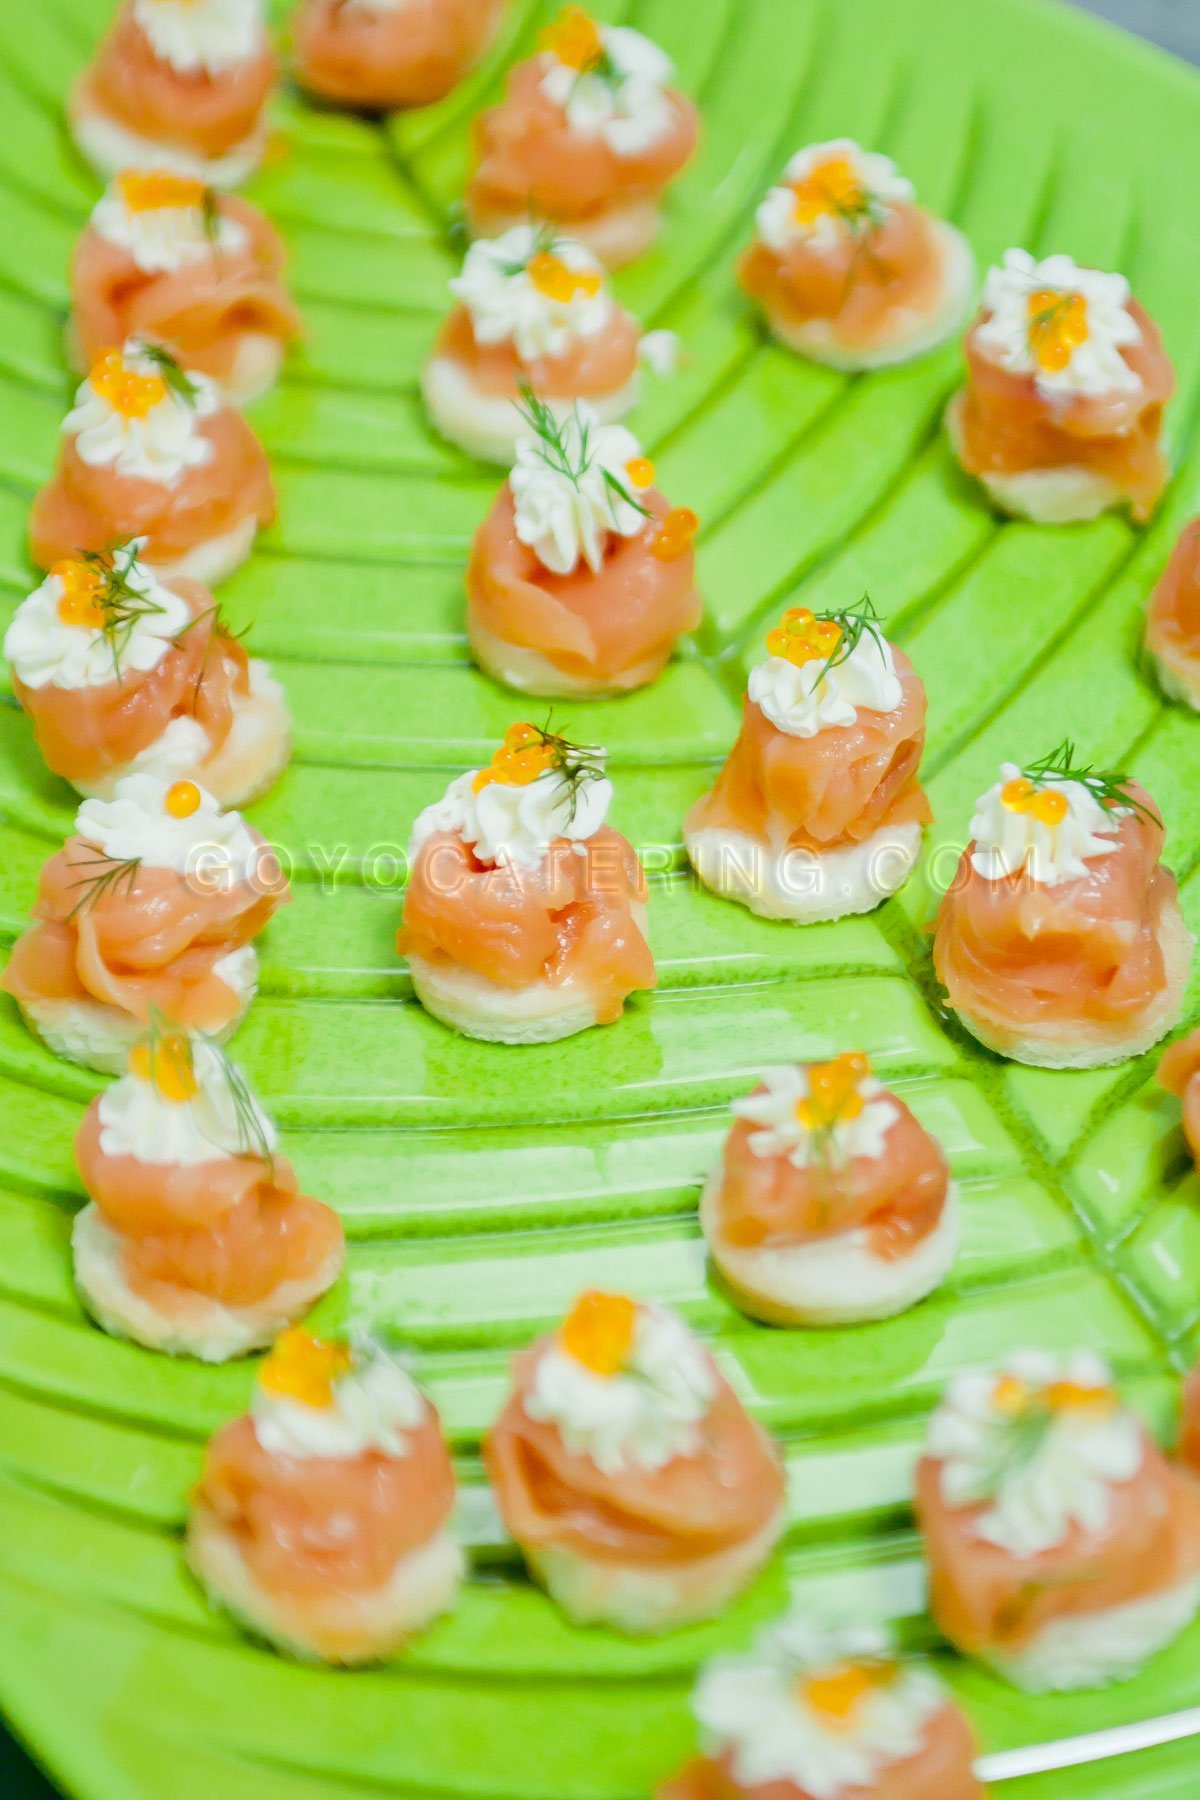 Salmon with dill and caviar canapé. | Goyo Catering